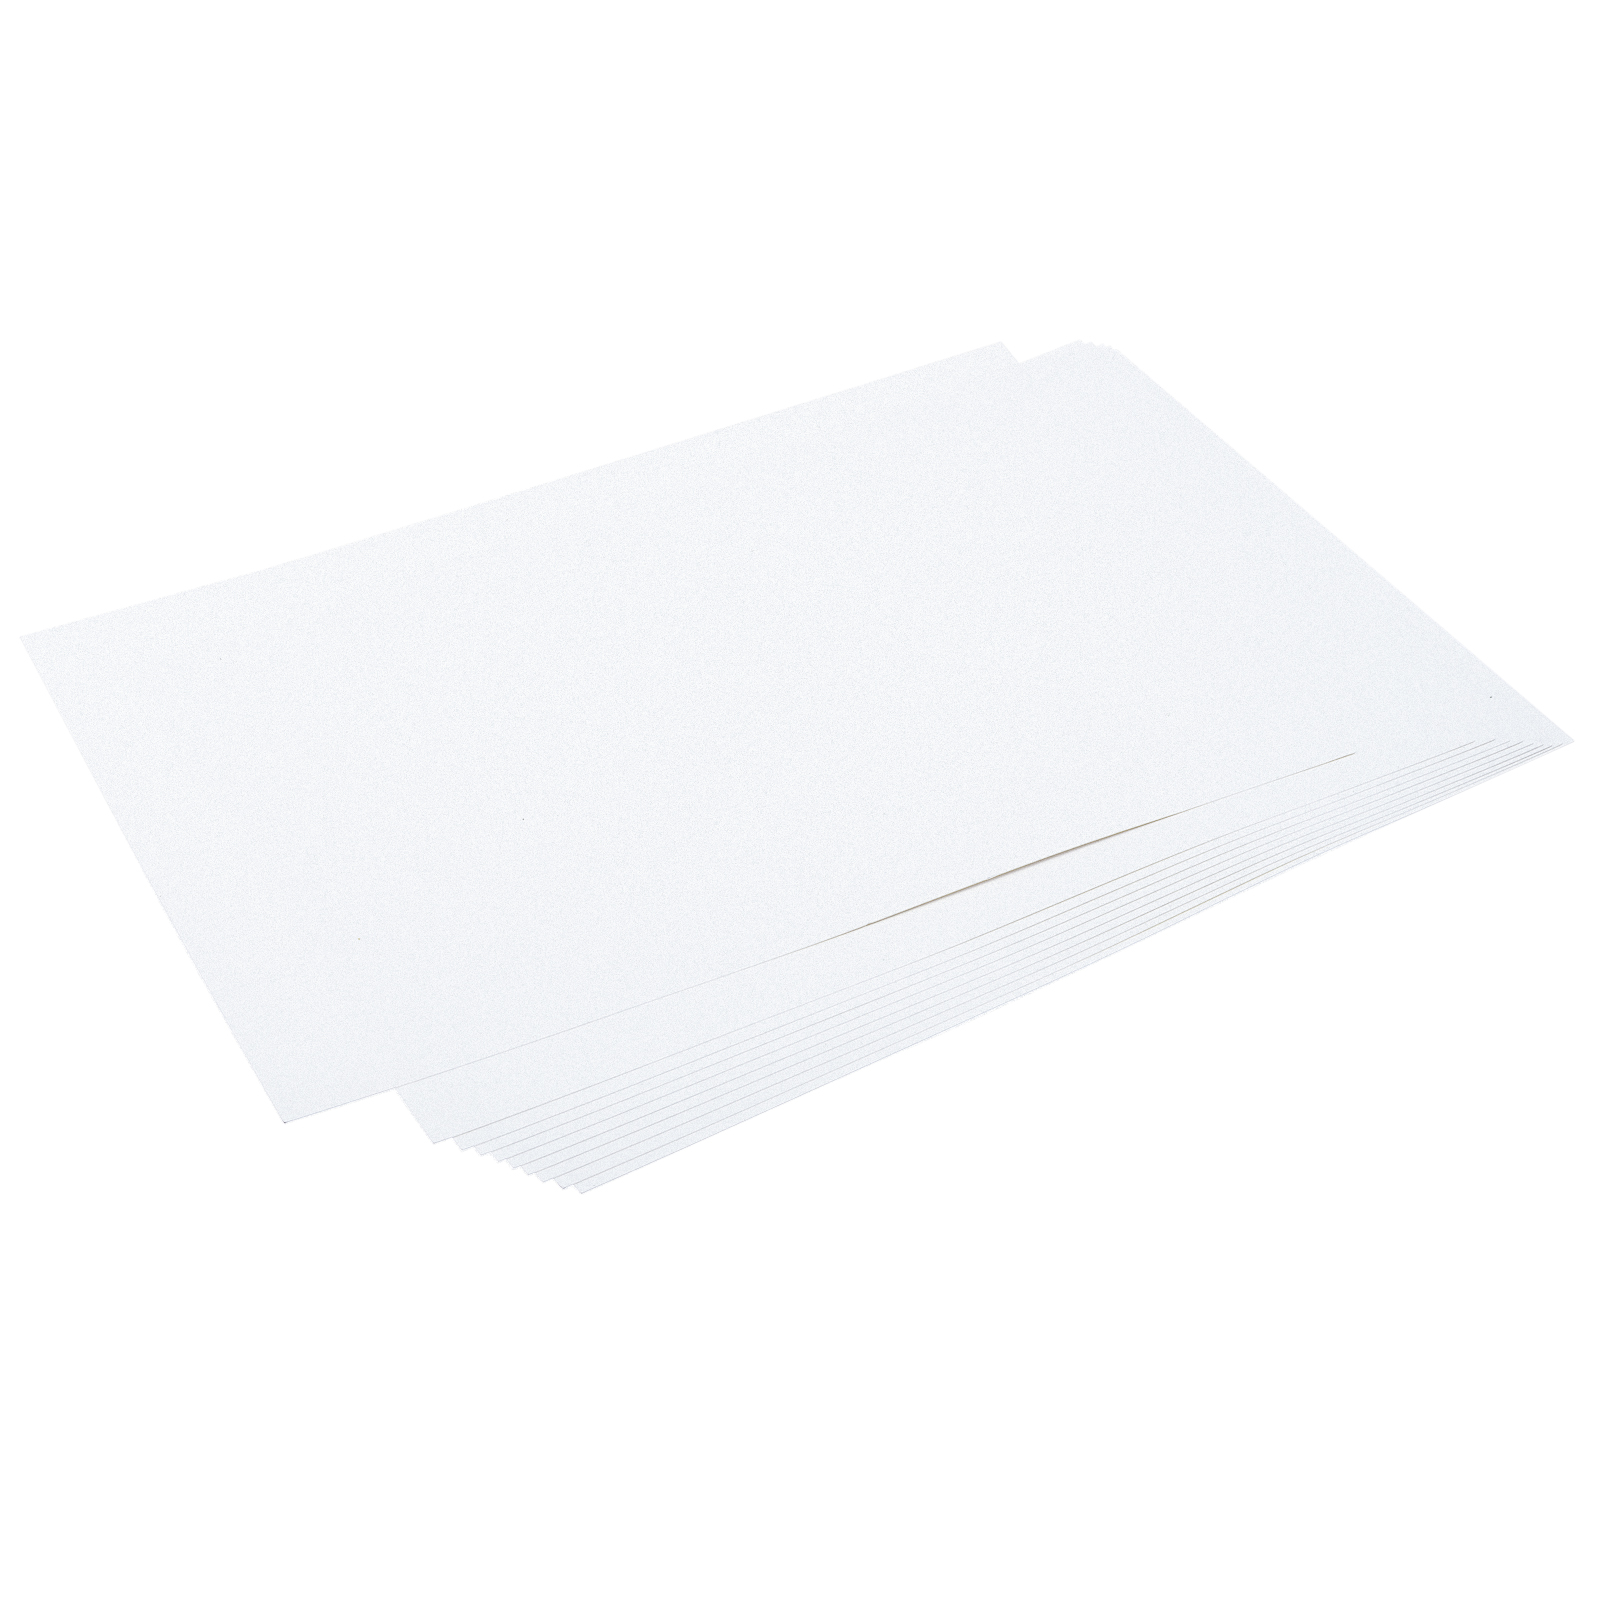 Uxcell Shimmer Cardstock Paper 10 Sheets, 8x11.5 Inch 92 Lb/250gsm, Cream 